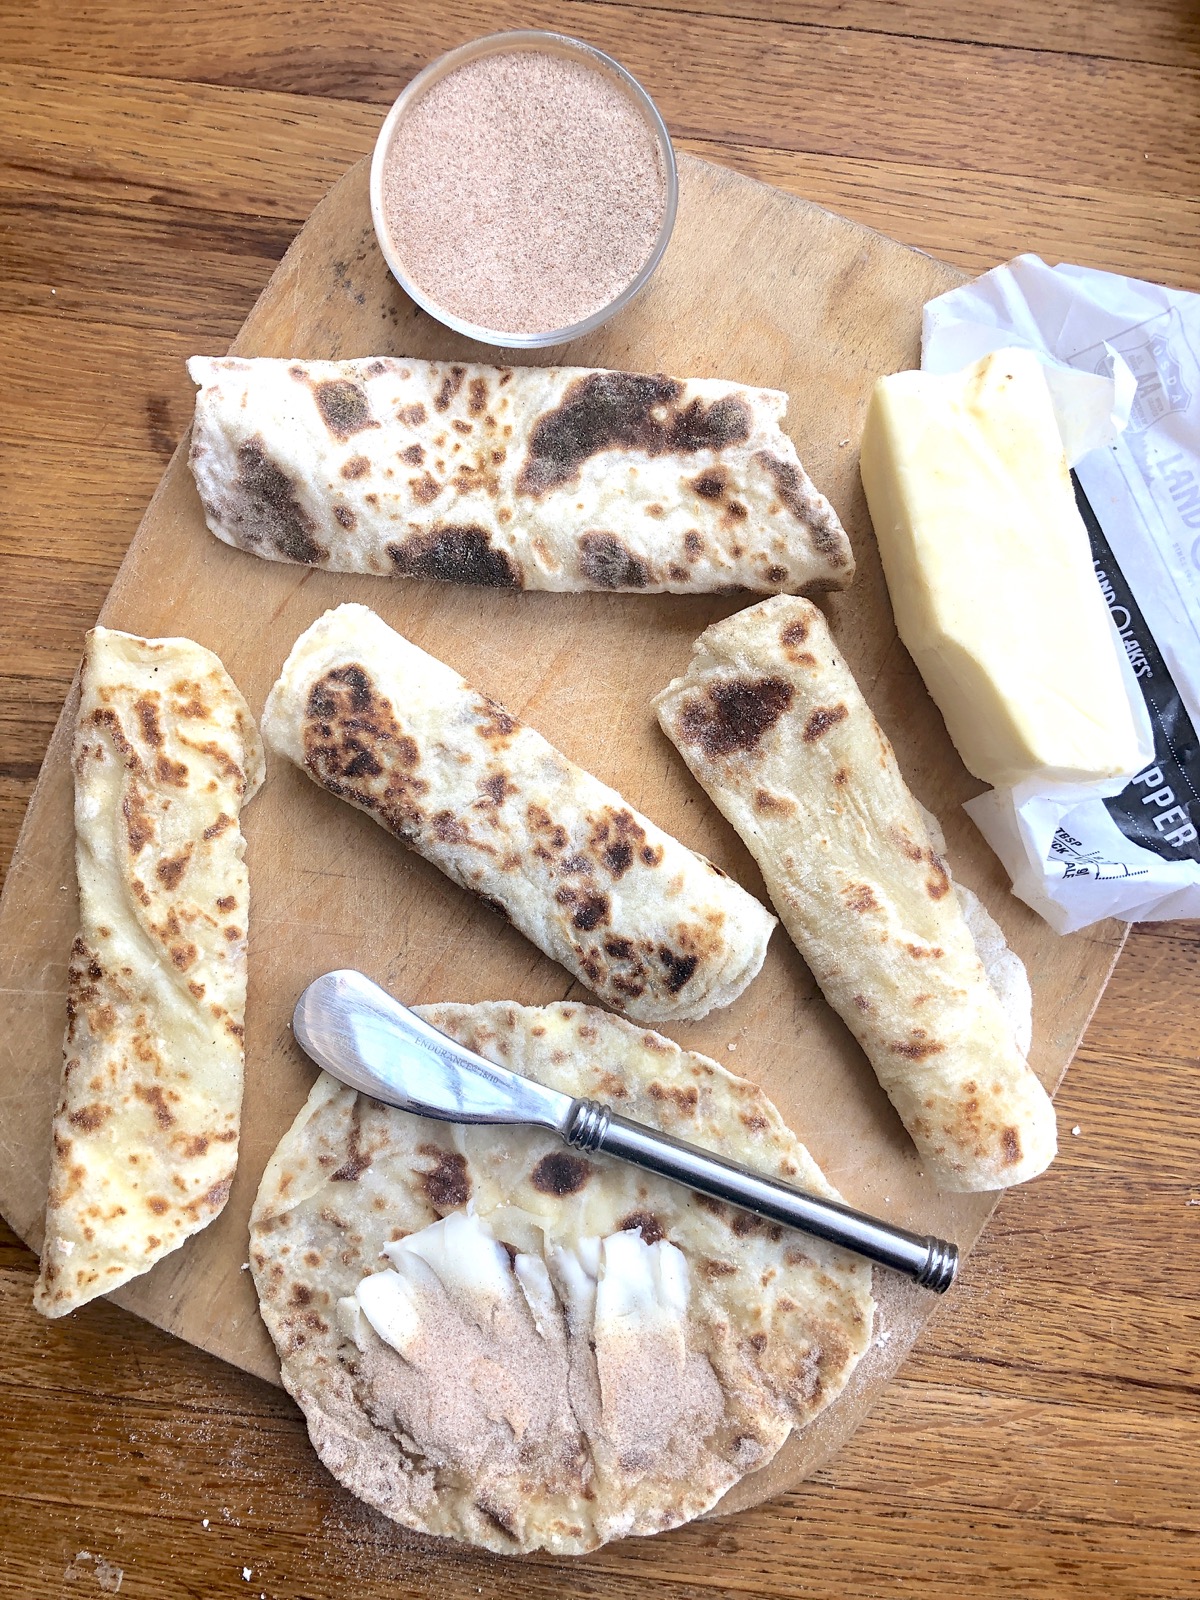 Lefse rolled into cylinders on a cutting board, one open being spread with butter and sprinkled with cinnamon sugar.